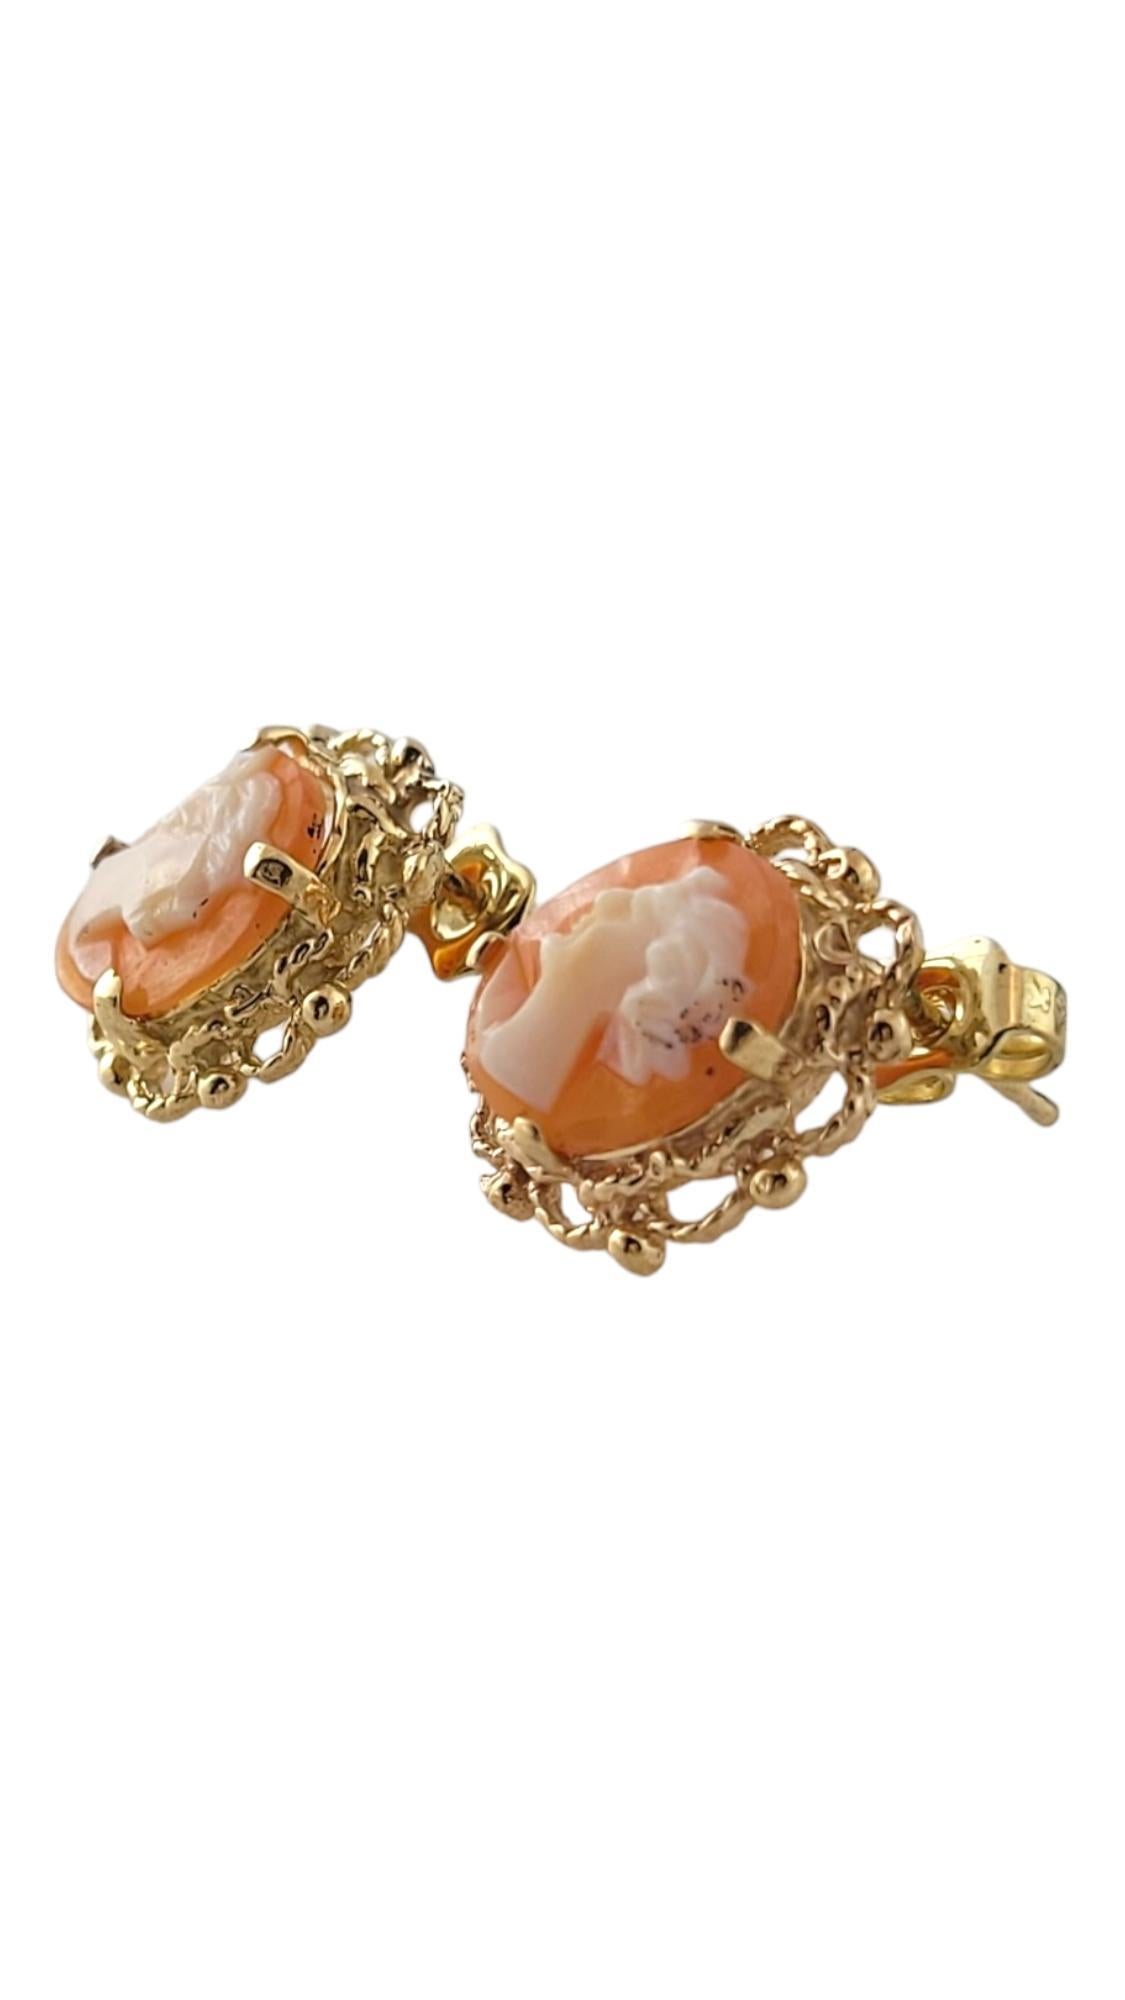 Vintage 10K Yellow Gold Cameo Earrings

These beautiful cameo earrings are meticulously crafted from 10K yellow gold!

Size: 14mm X 13mm X 5mm

Weight: 2.1 dwt/ 3.4 g

Tested 10K

Very good condition, professionally polished.

Will come packaged in